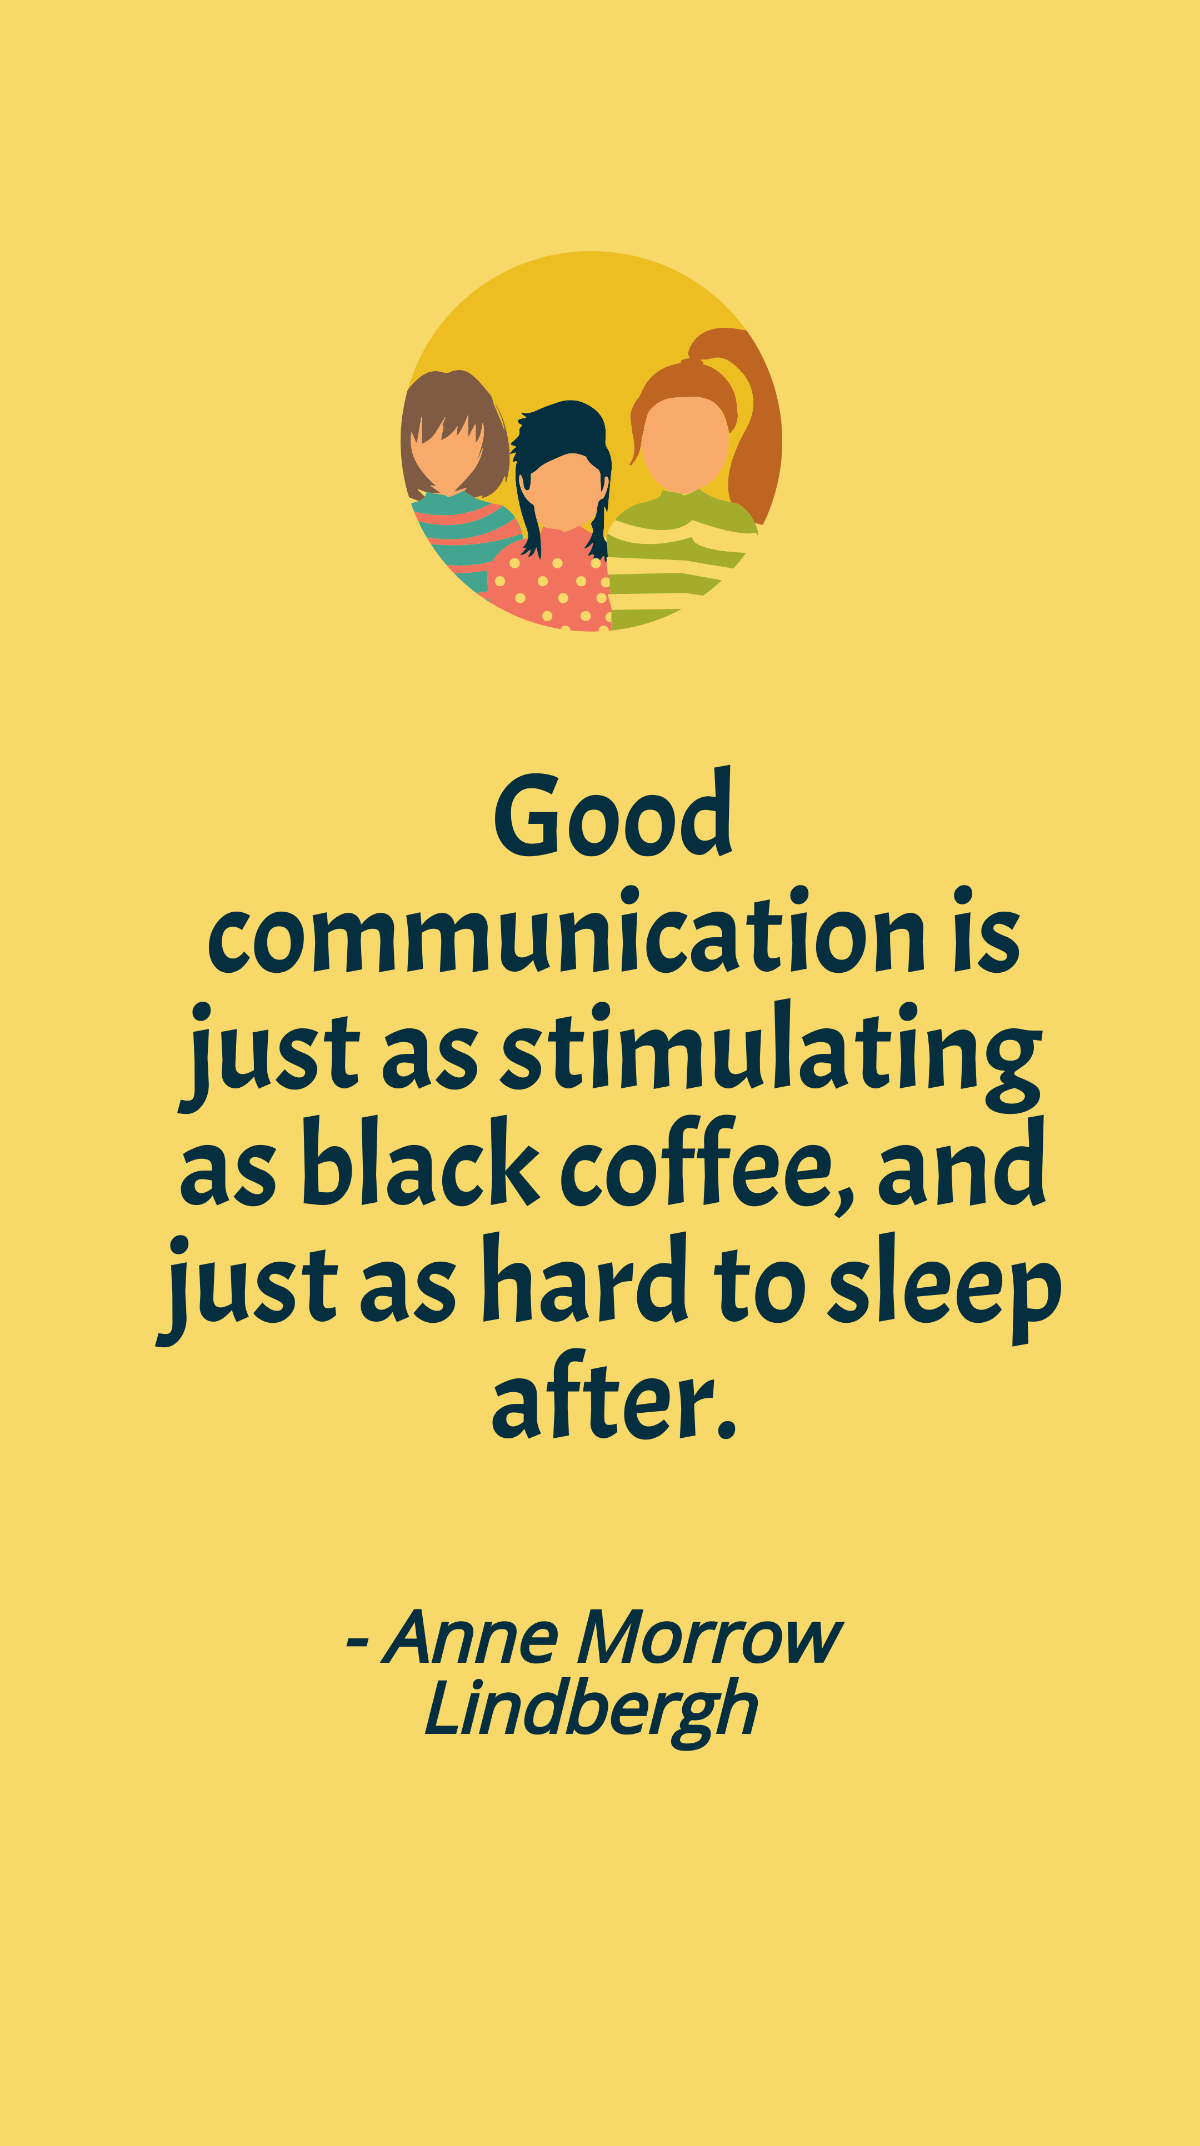 Anne Morrow Lindbergh - Good communication is just as stimulating as black coffee, and just as hard to sleep after.